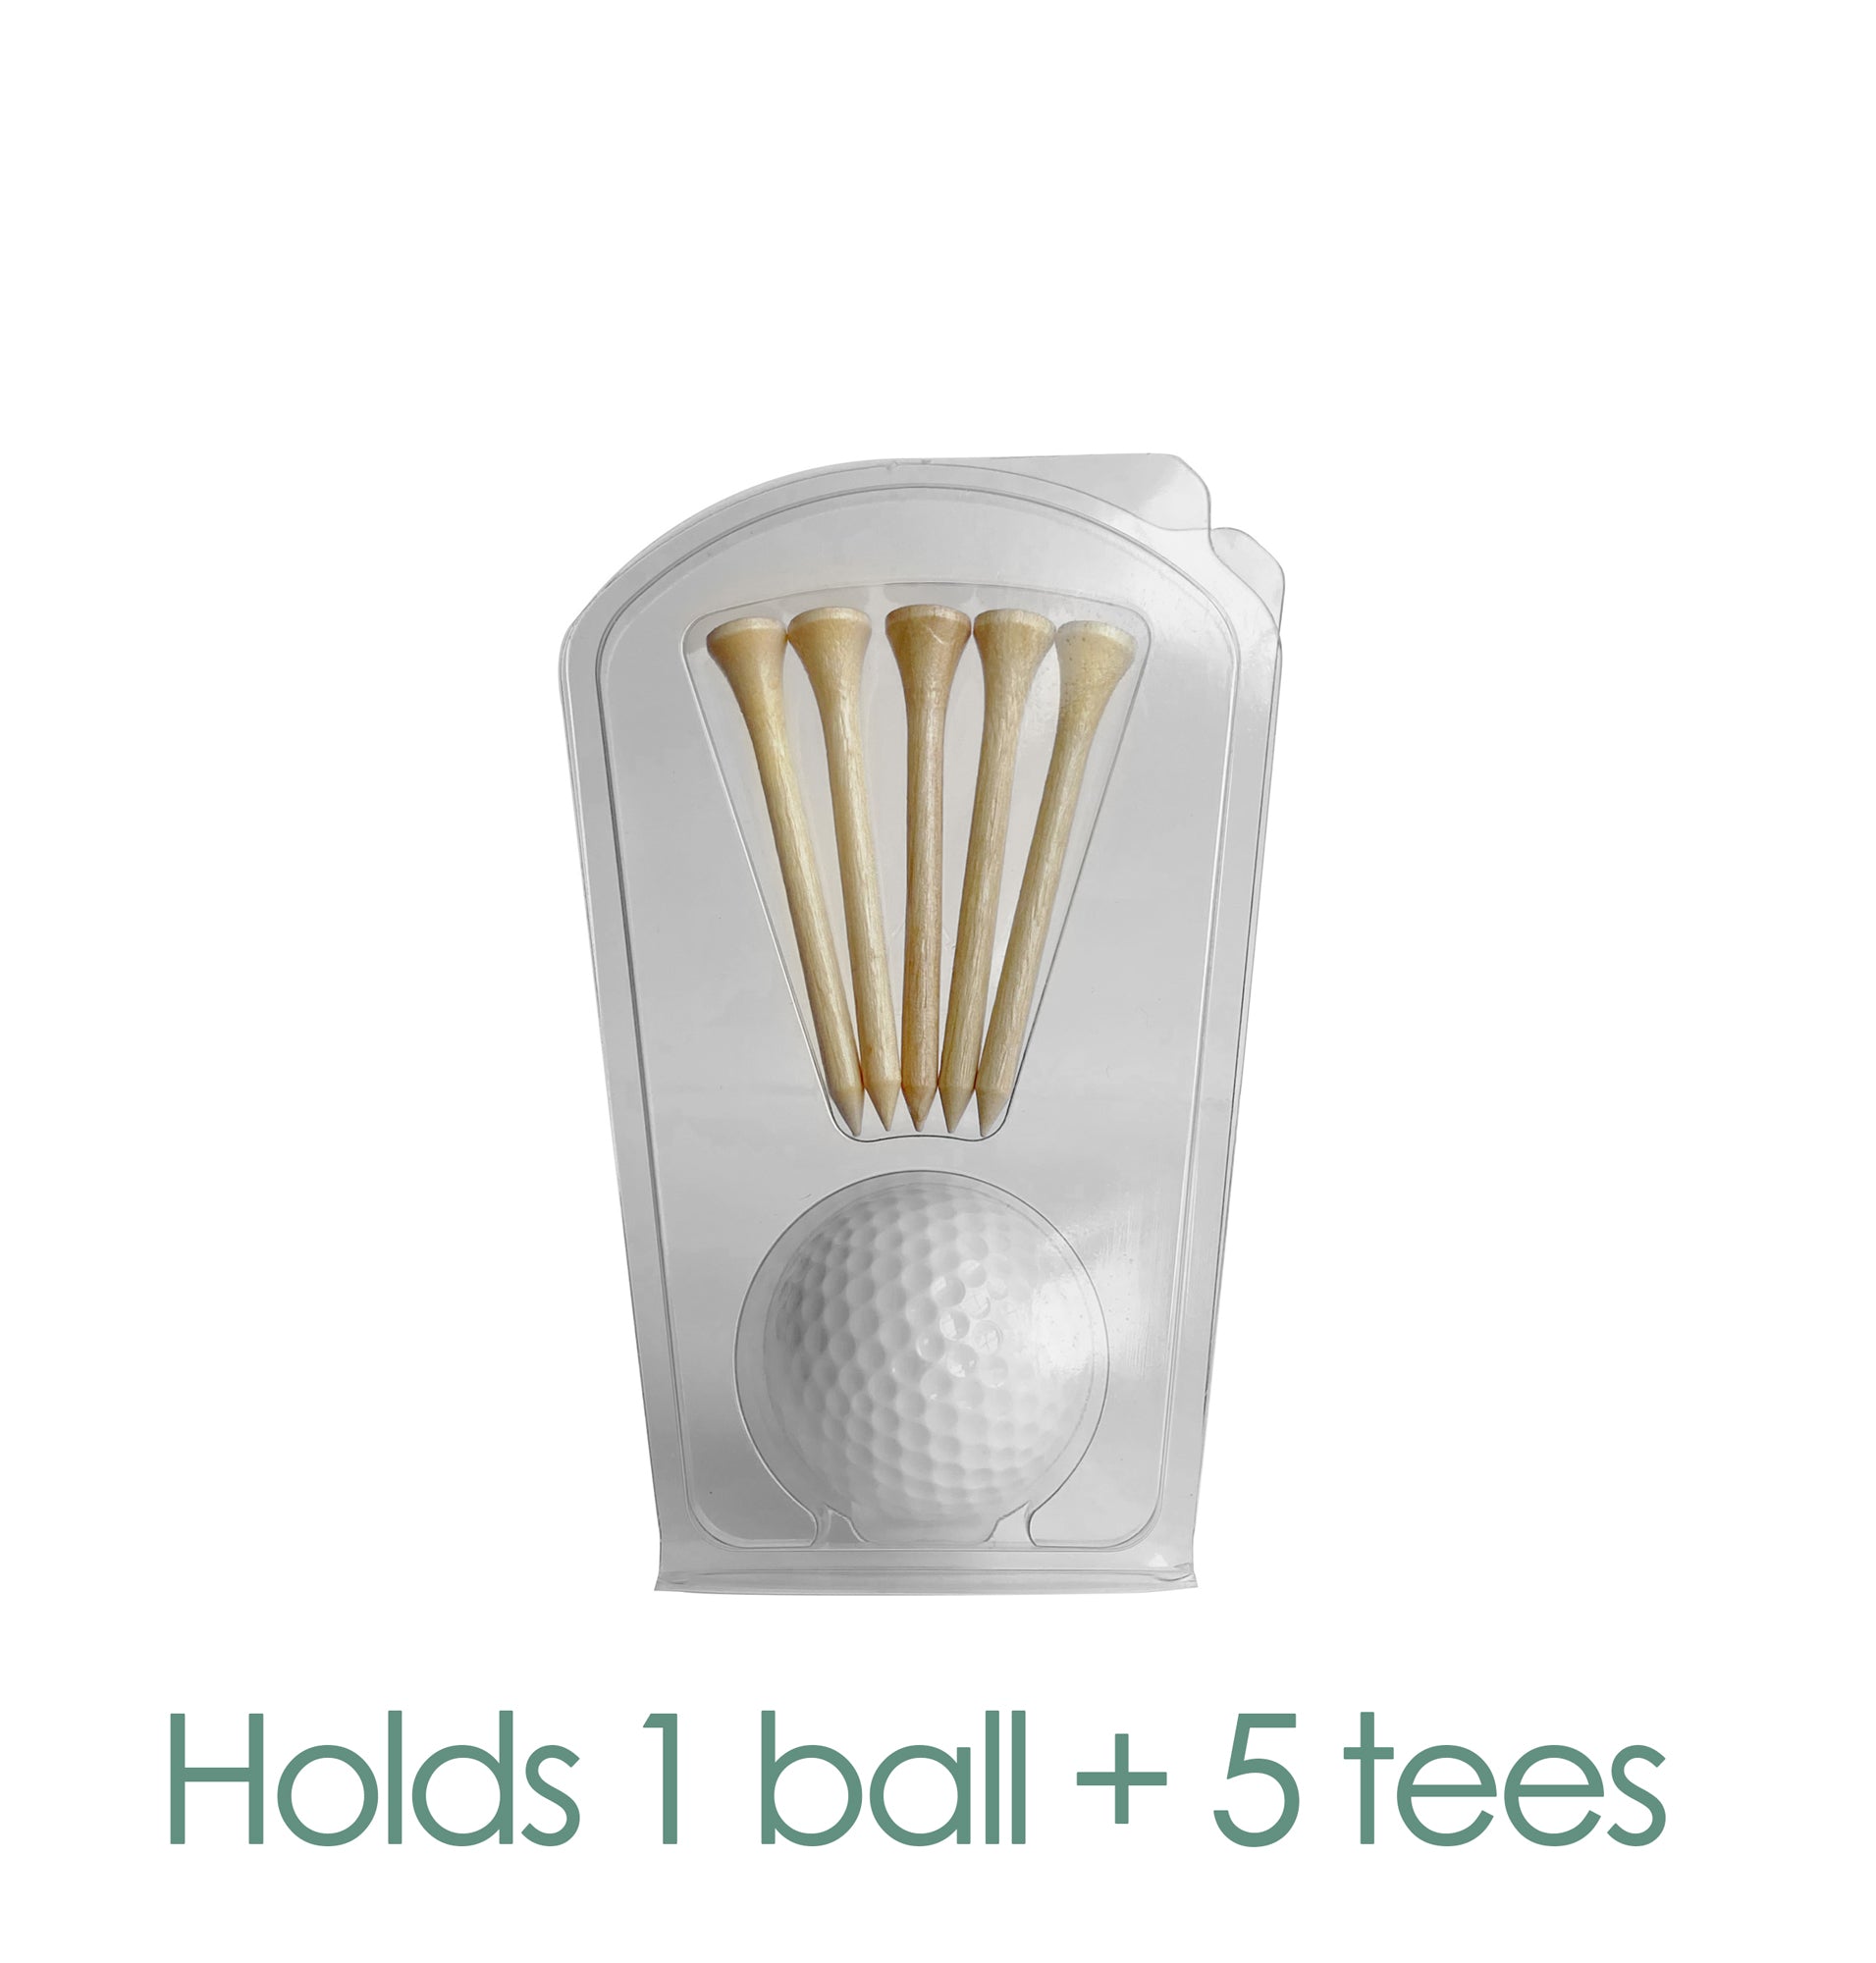 Single Golf Ball Clamshell with Tees